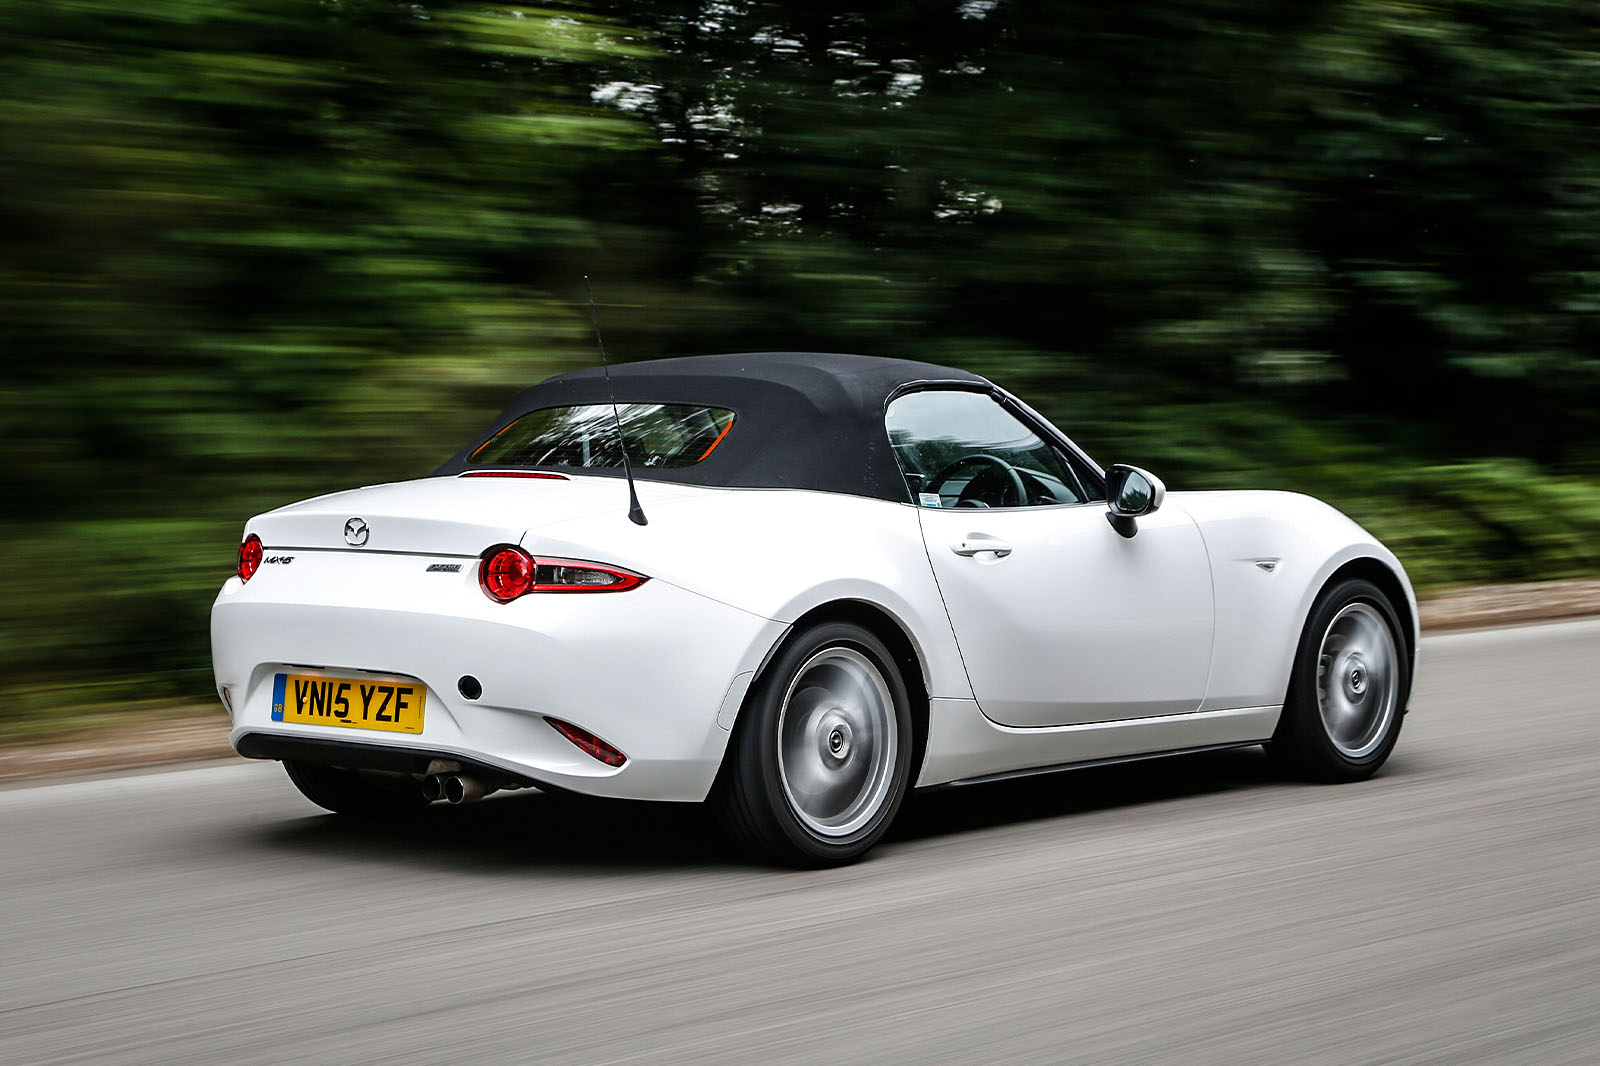 The first Mazda MX-5 made its appearance in 1989, with us testing the new 1.5-litre SE-L Nav version